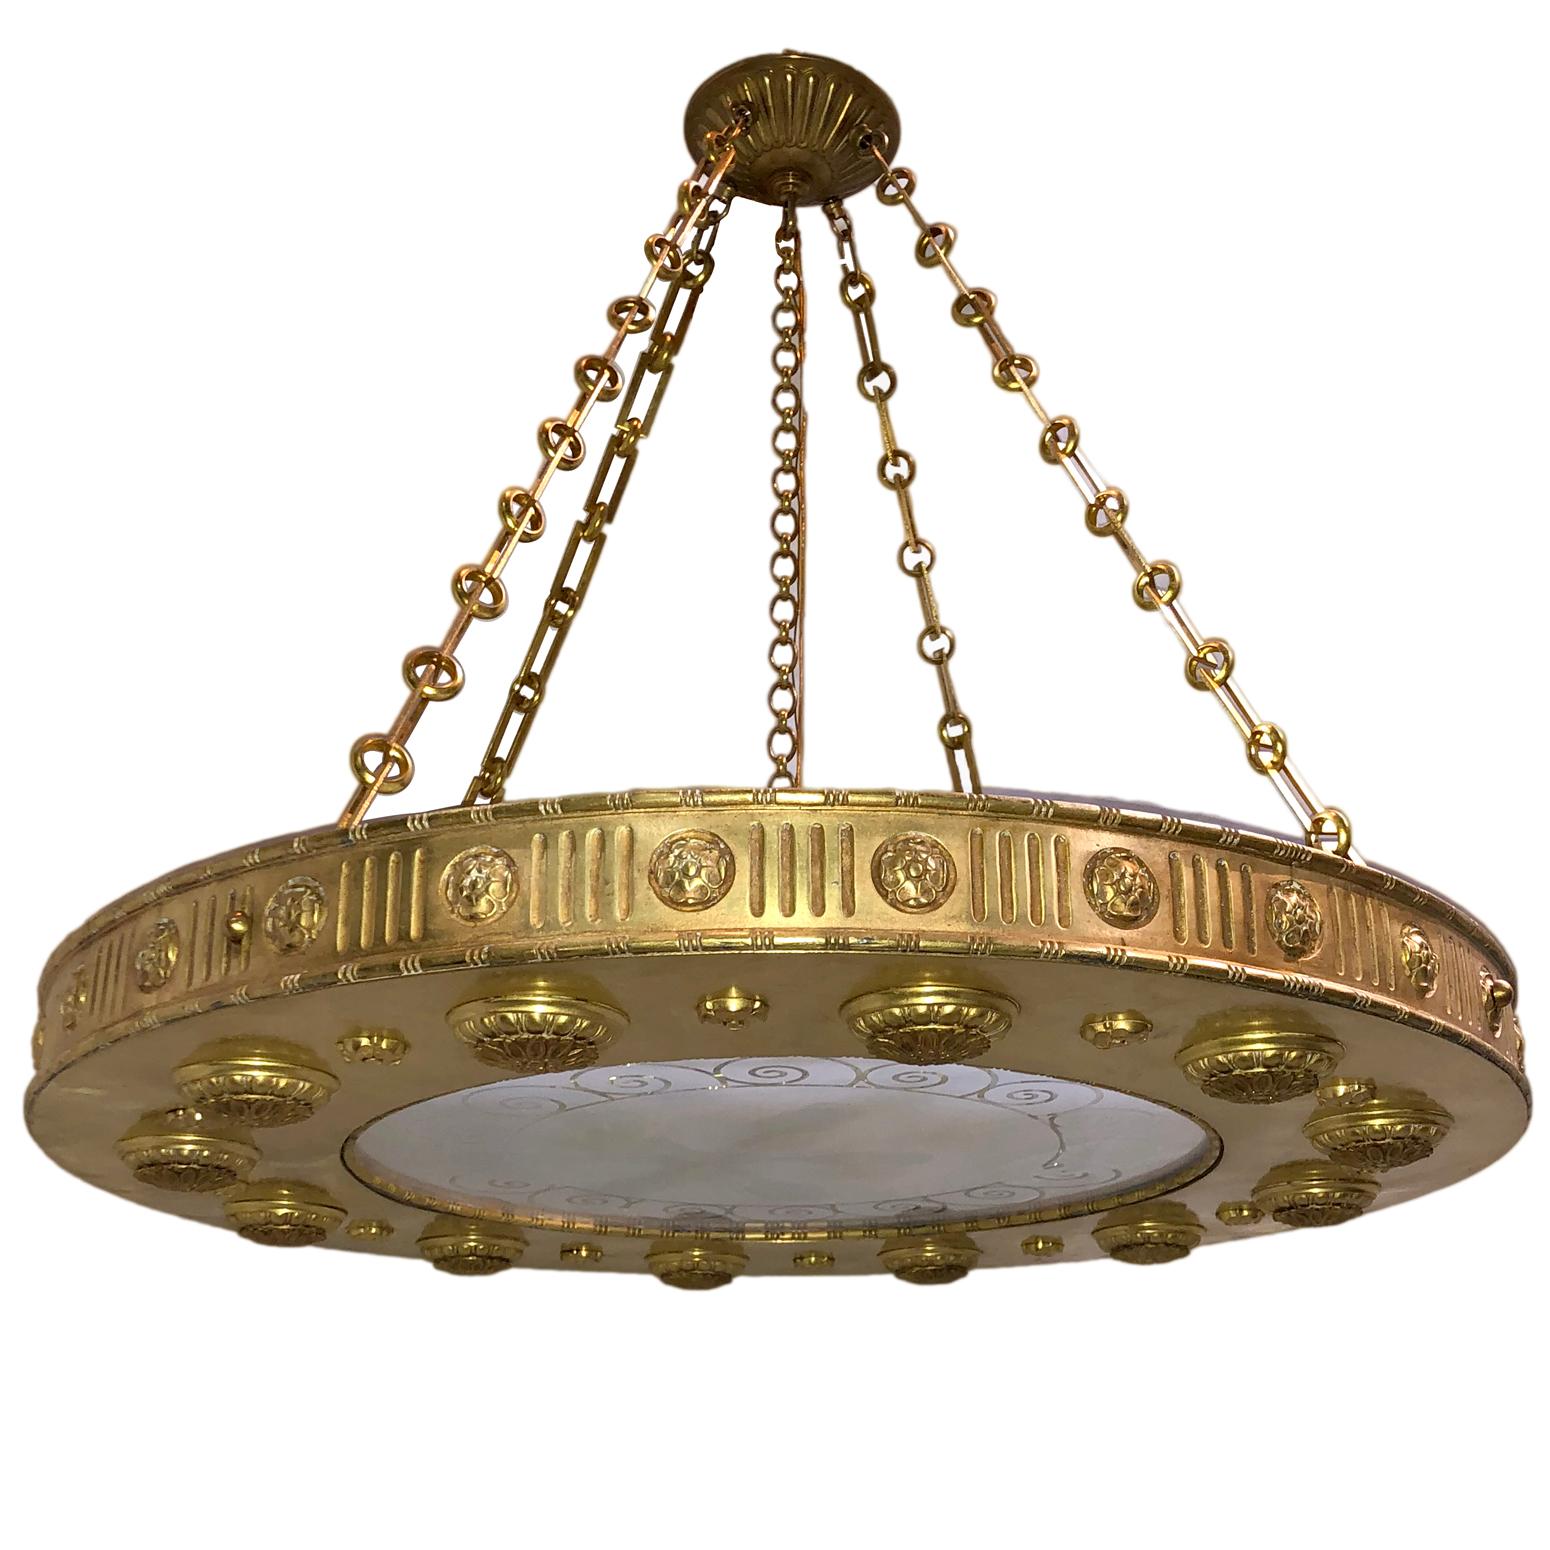 A large circa 1920s French gilt bronze and etched glass light fixture with interior lights.

Measurements:
Diameter 31